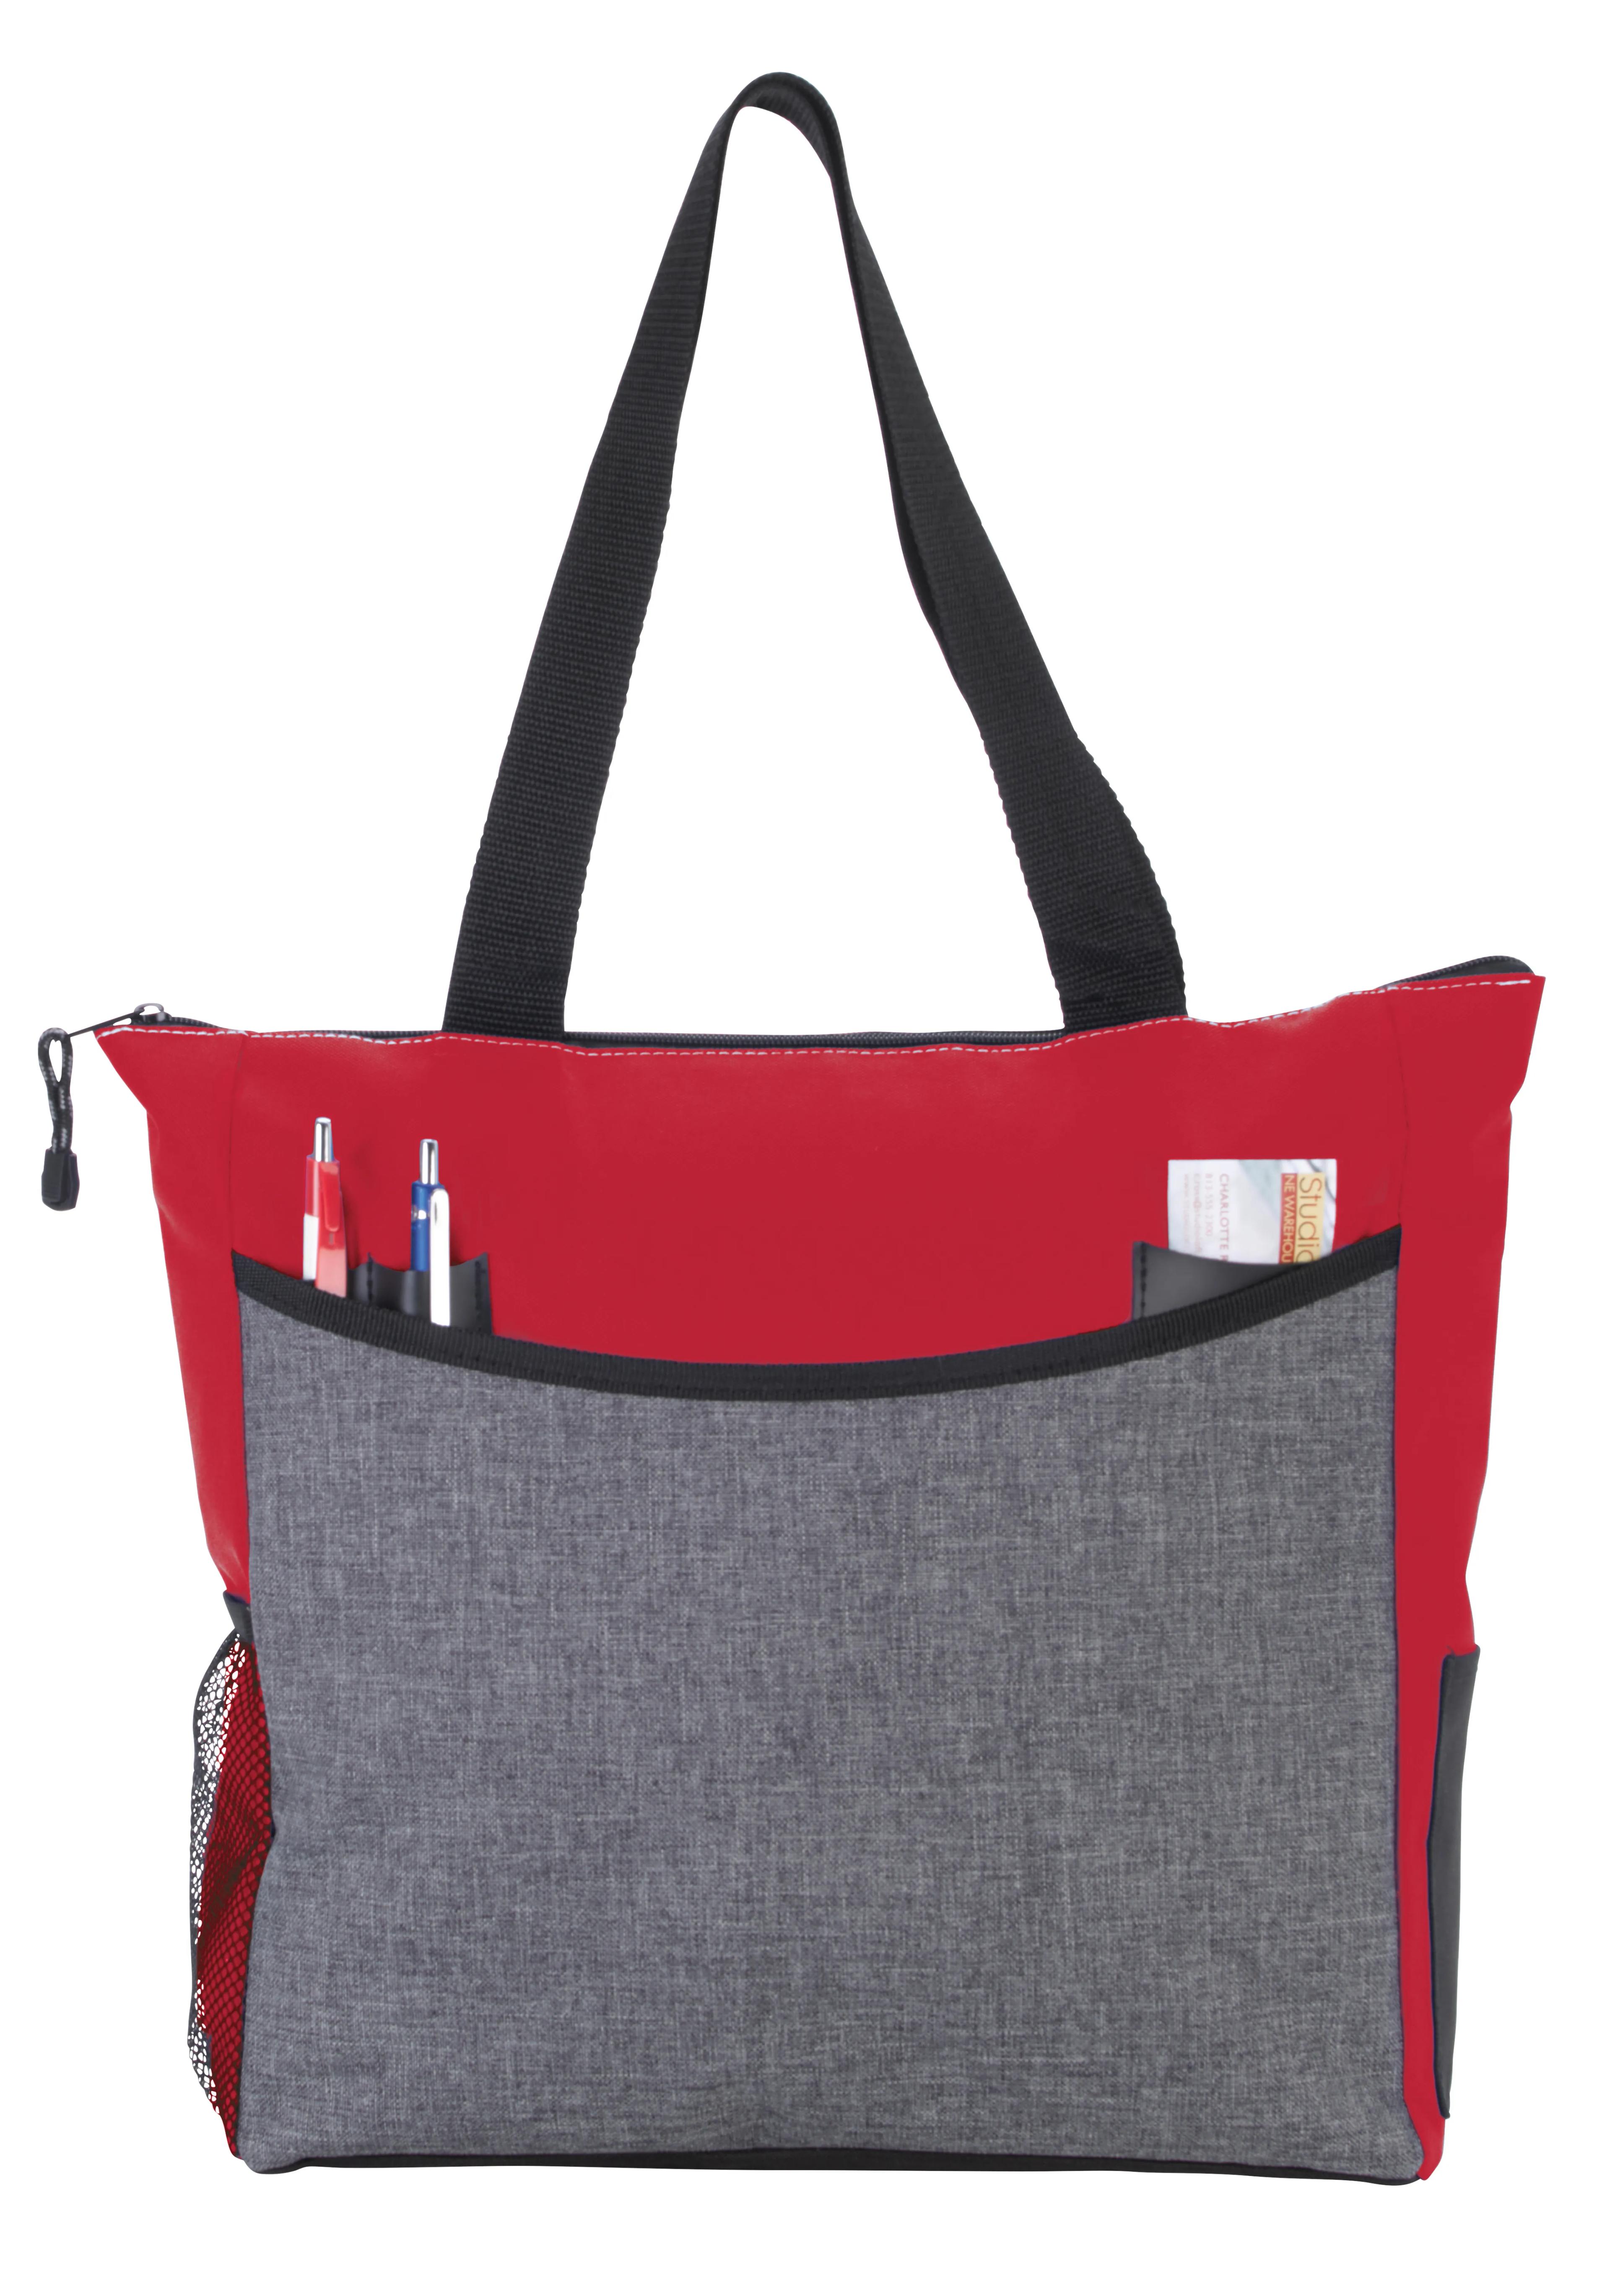 Two-Tone TranSport It Tote 17 of 29